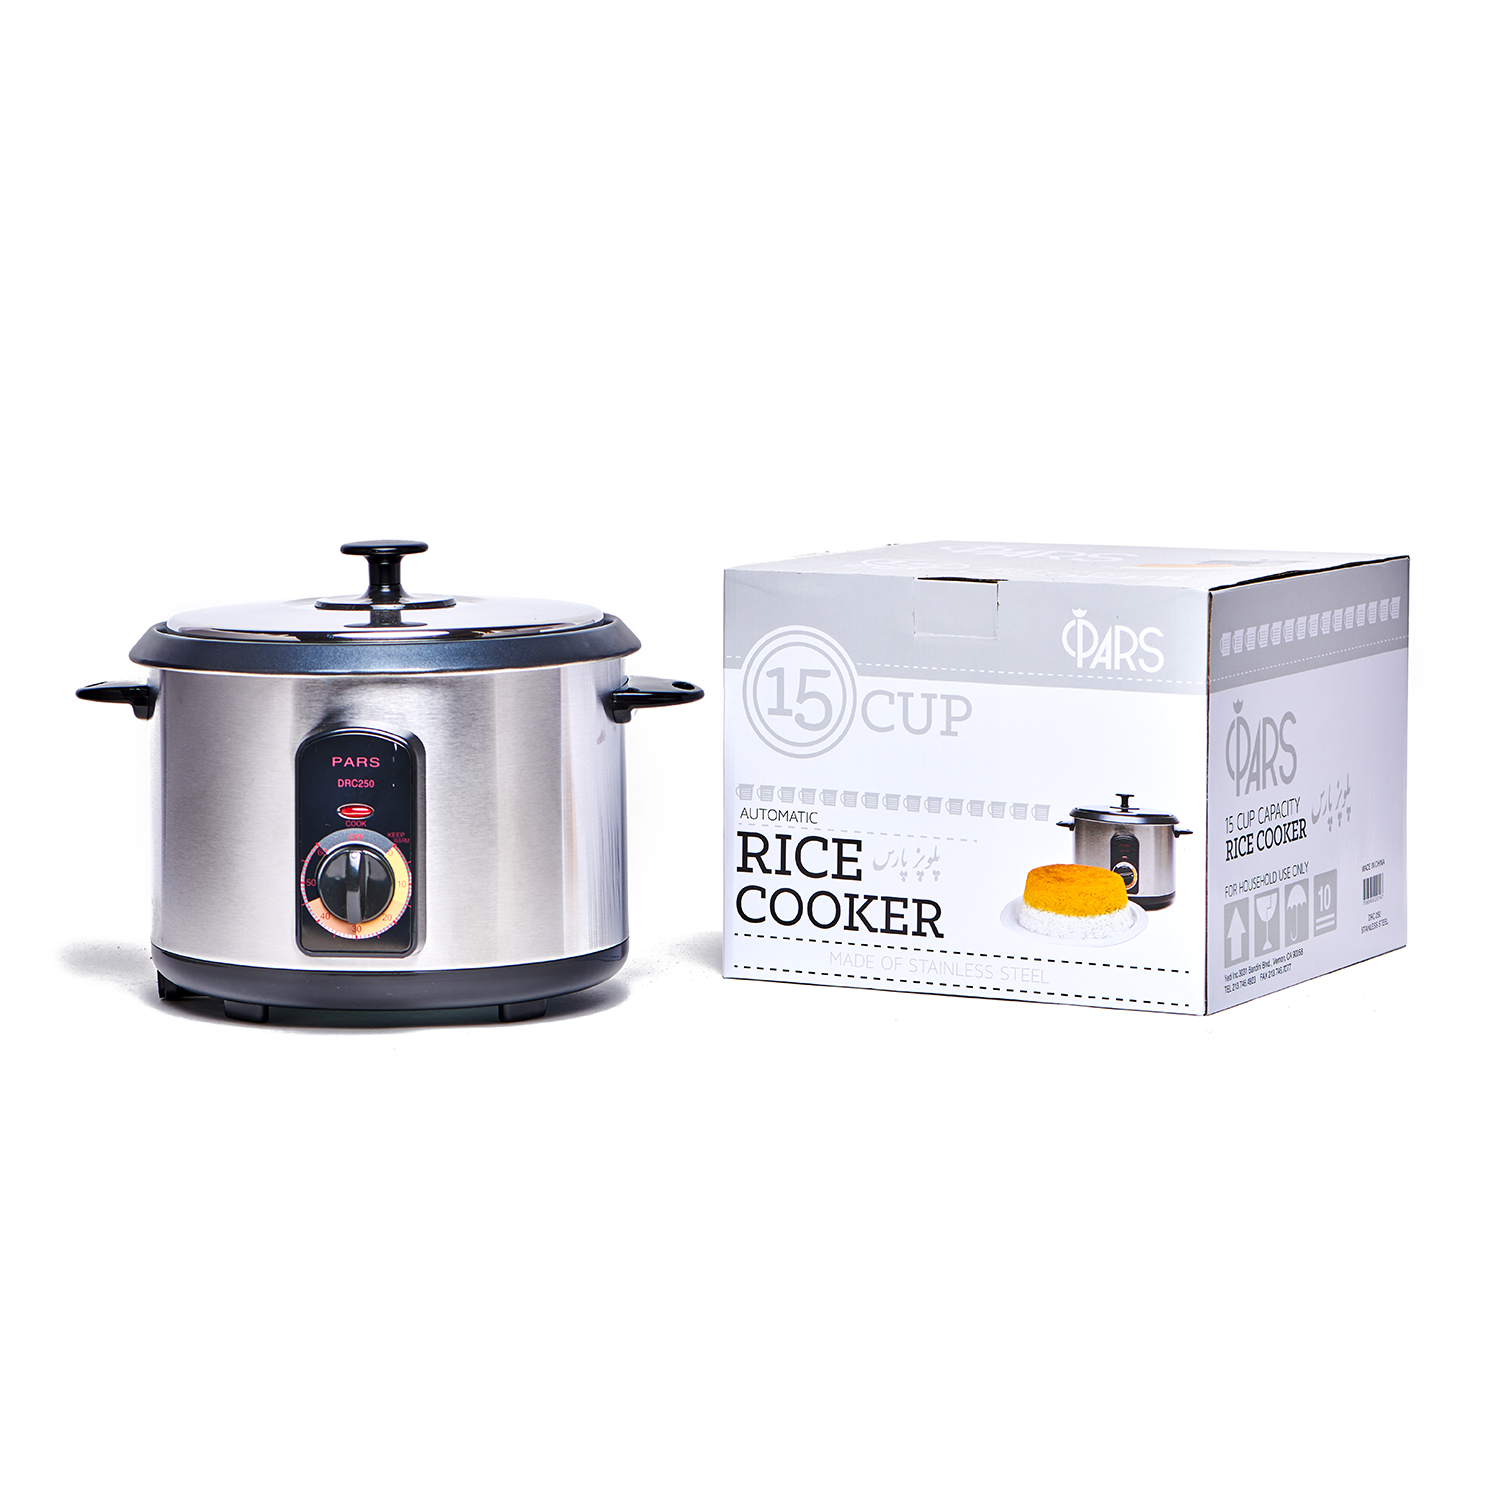 Pars 15 Cup Rice Cooker - Polopaz - پلوپز